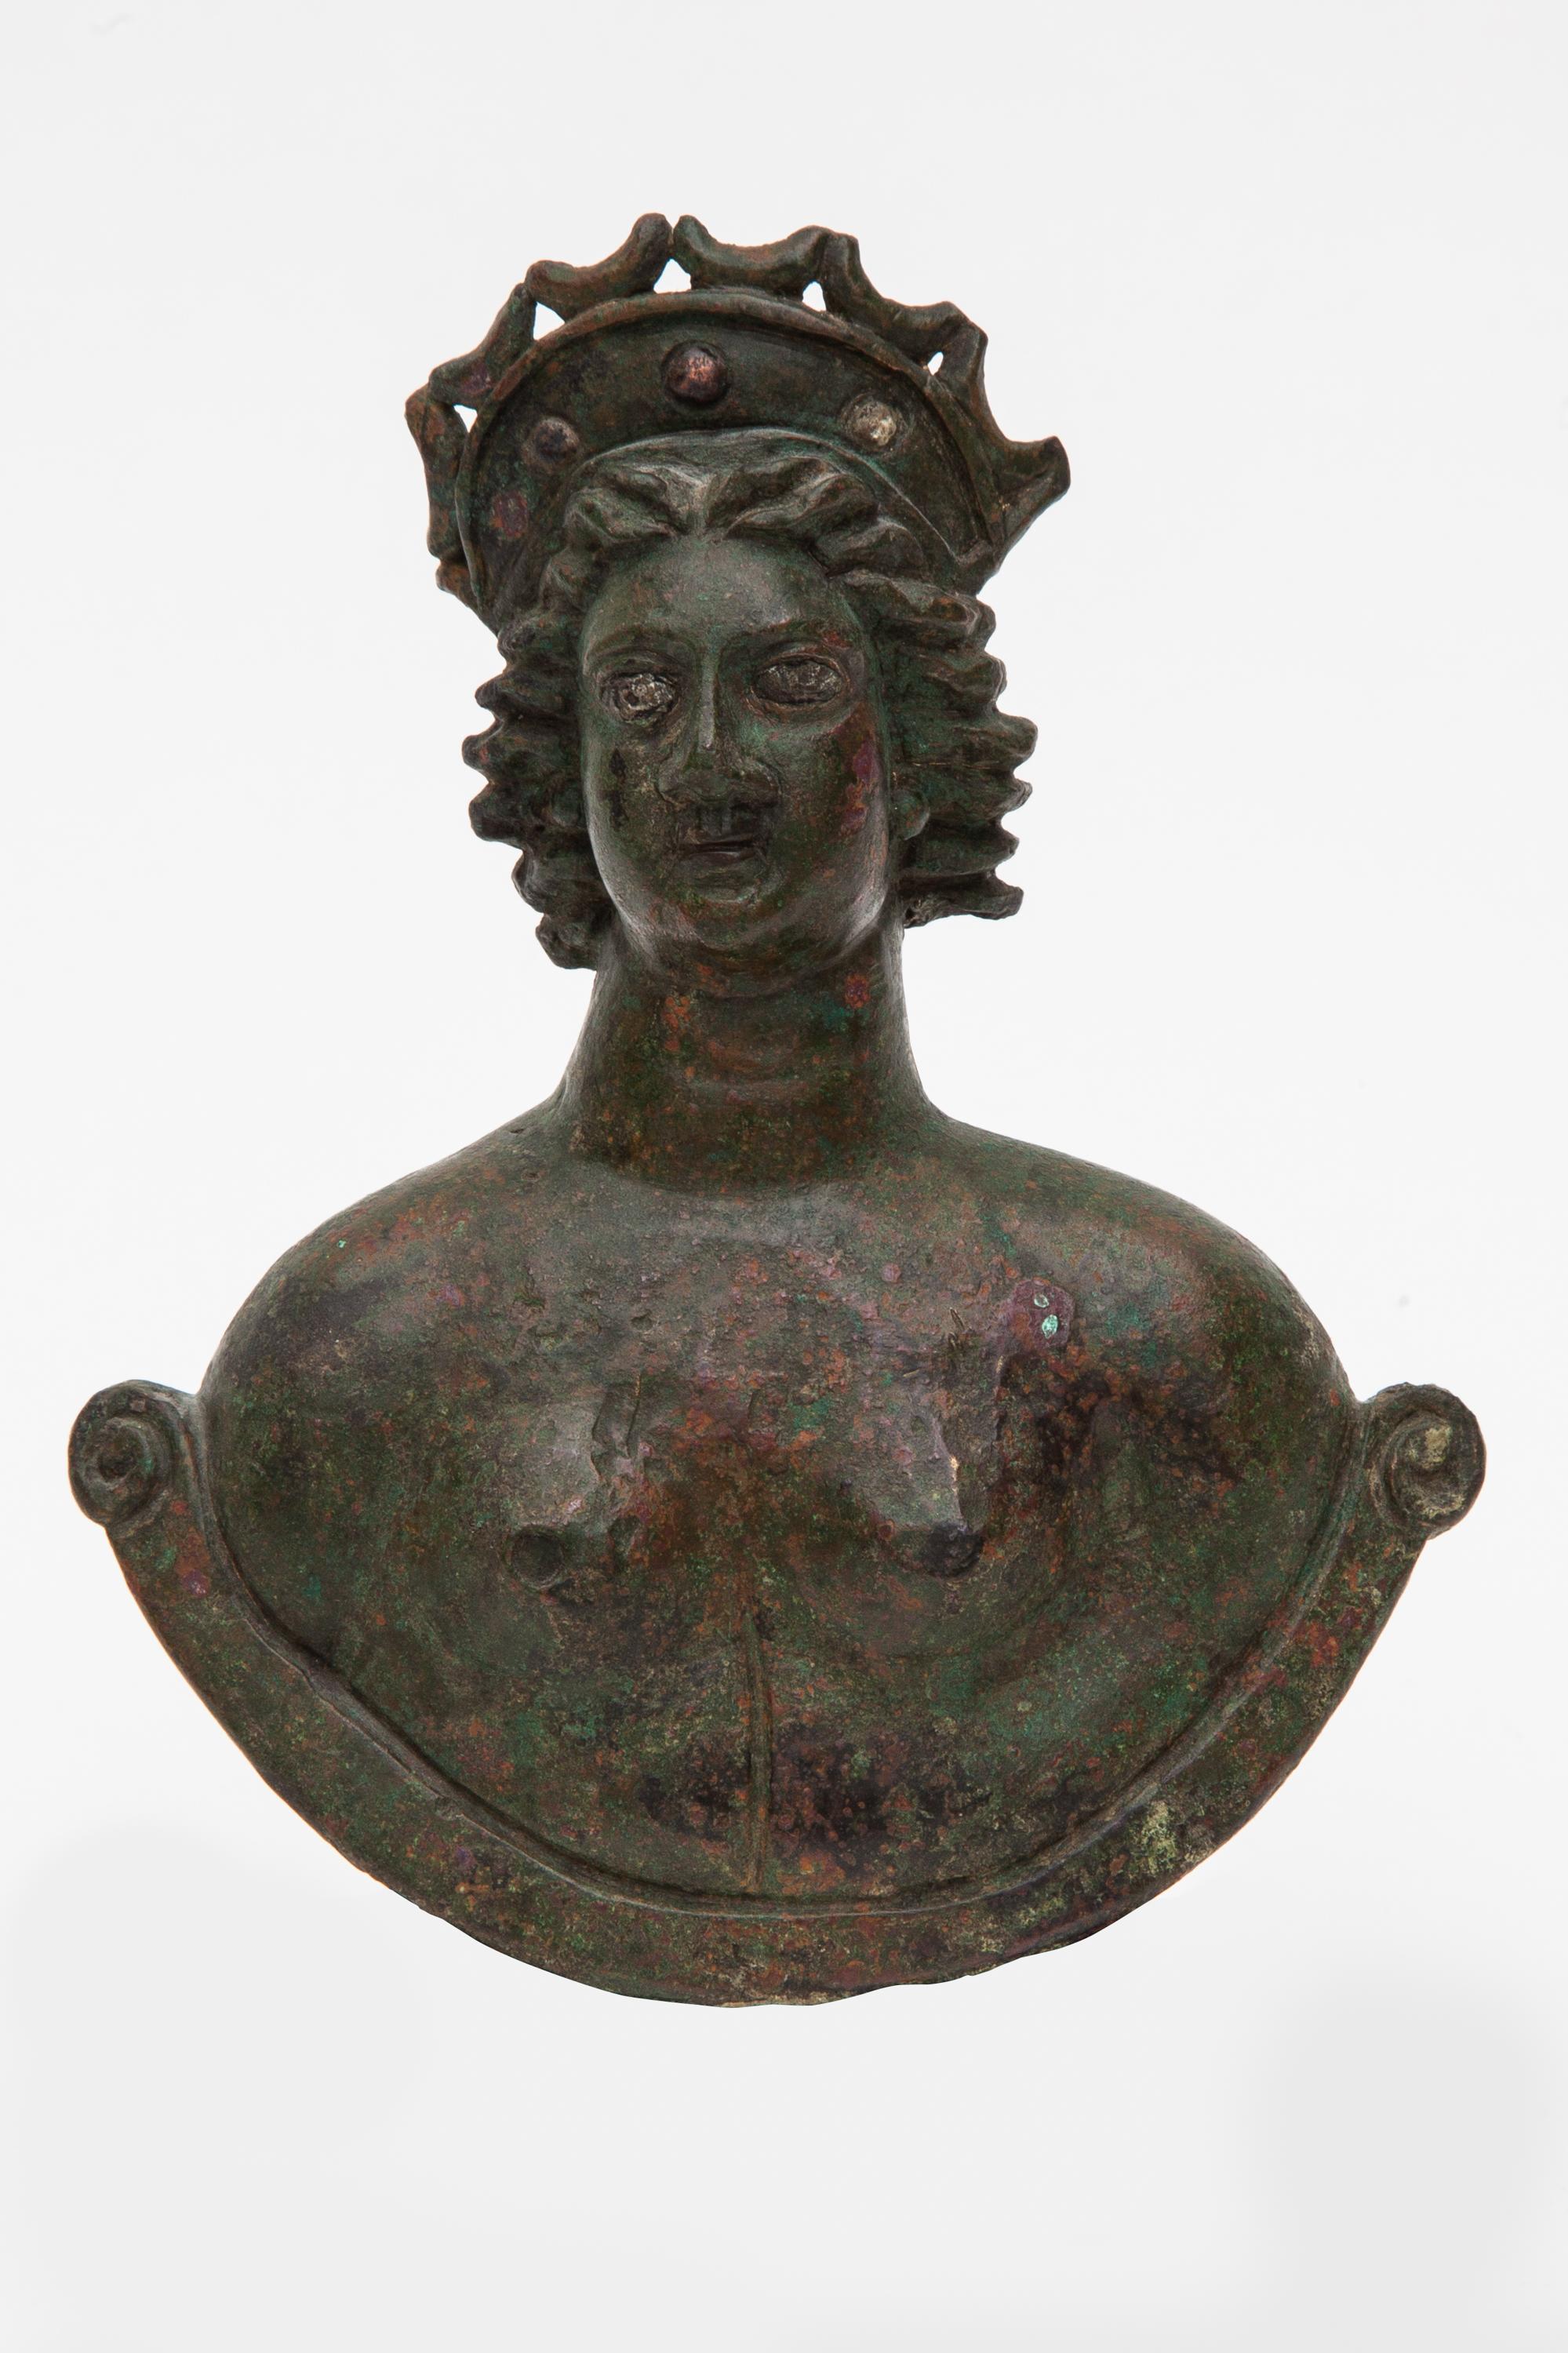 Large bust weight of Venus with silver inlaid eyes and celestial diadem,Roman culture,Germany,2nd-3rd century AD.
The goddess is depicted nude, slightly gazing to her right with detailed silver inlaid eyes and firmly expressed lips. Her hair is